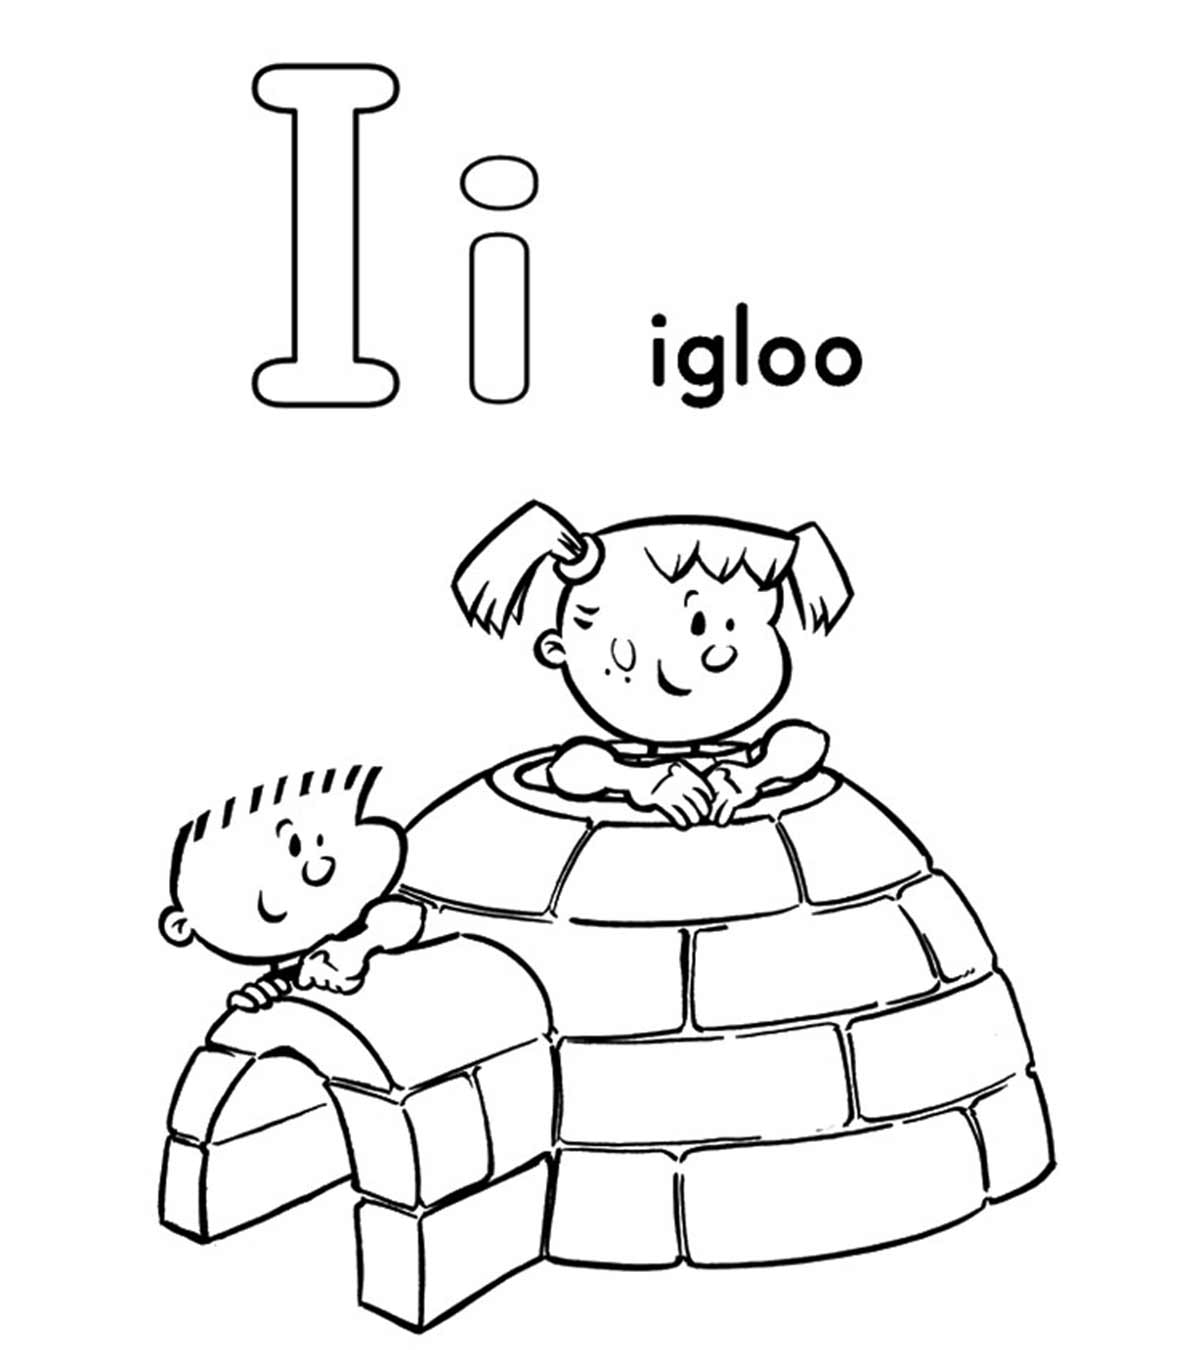 Top 10 Letter ‘I’ Coloring Pages Your Toddler Will Love To Learn & Color_image